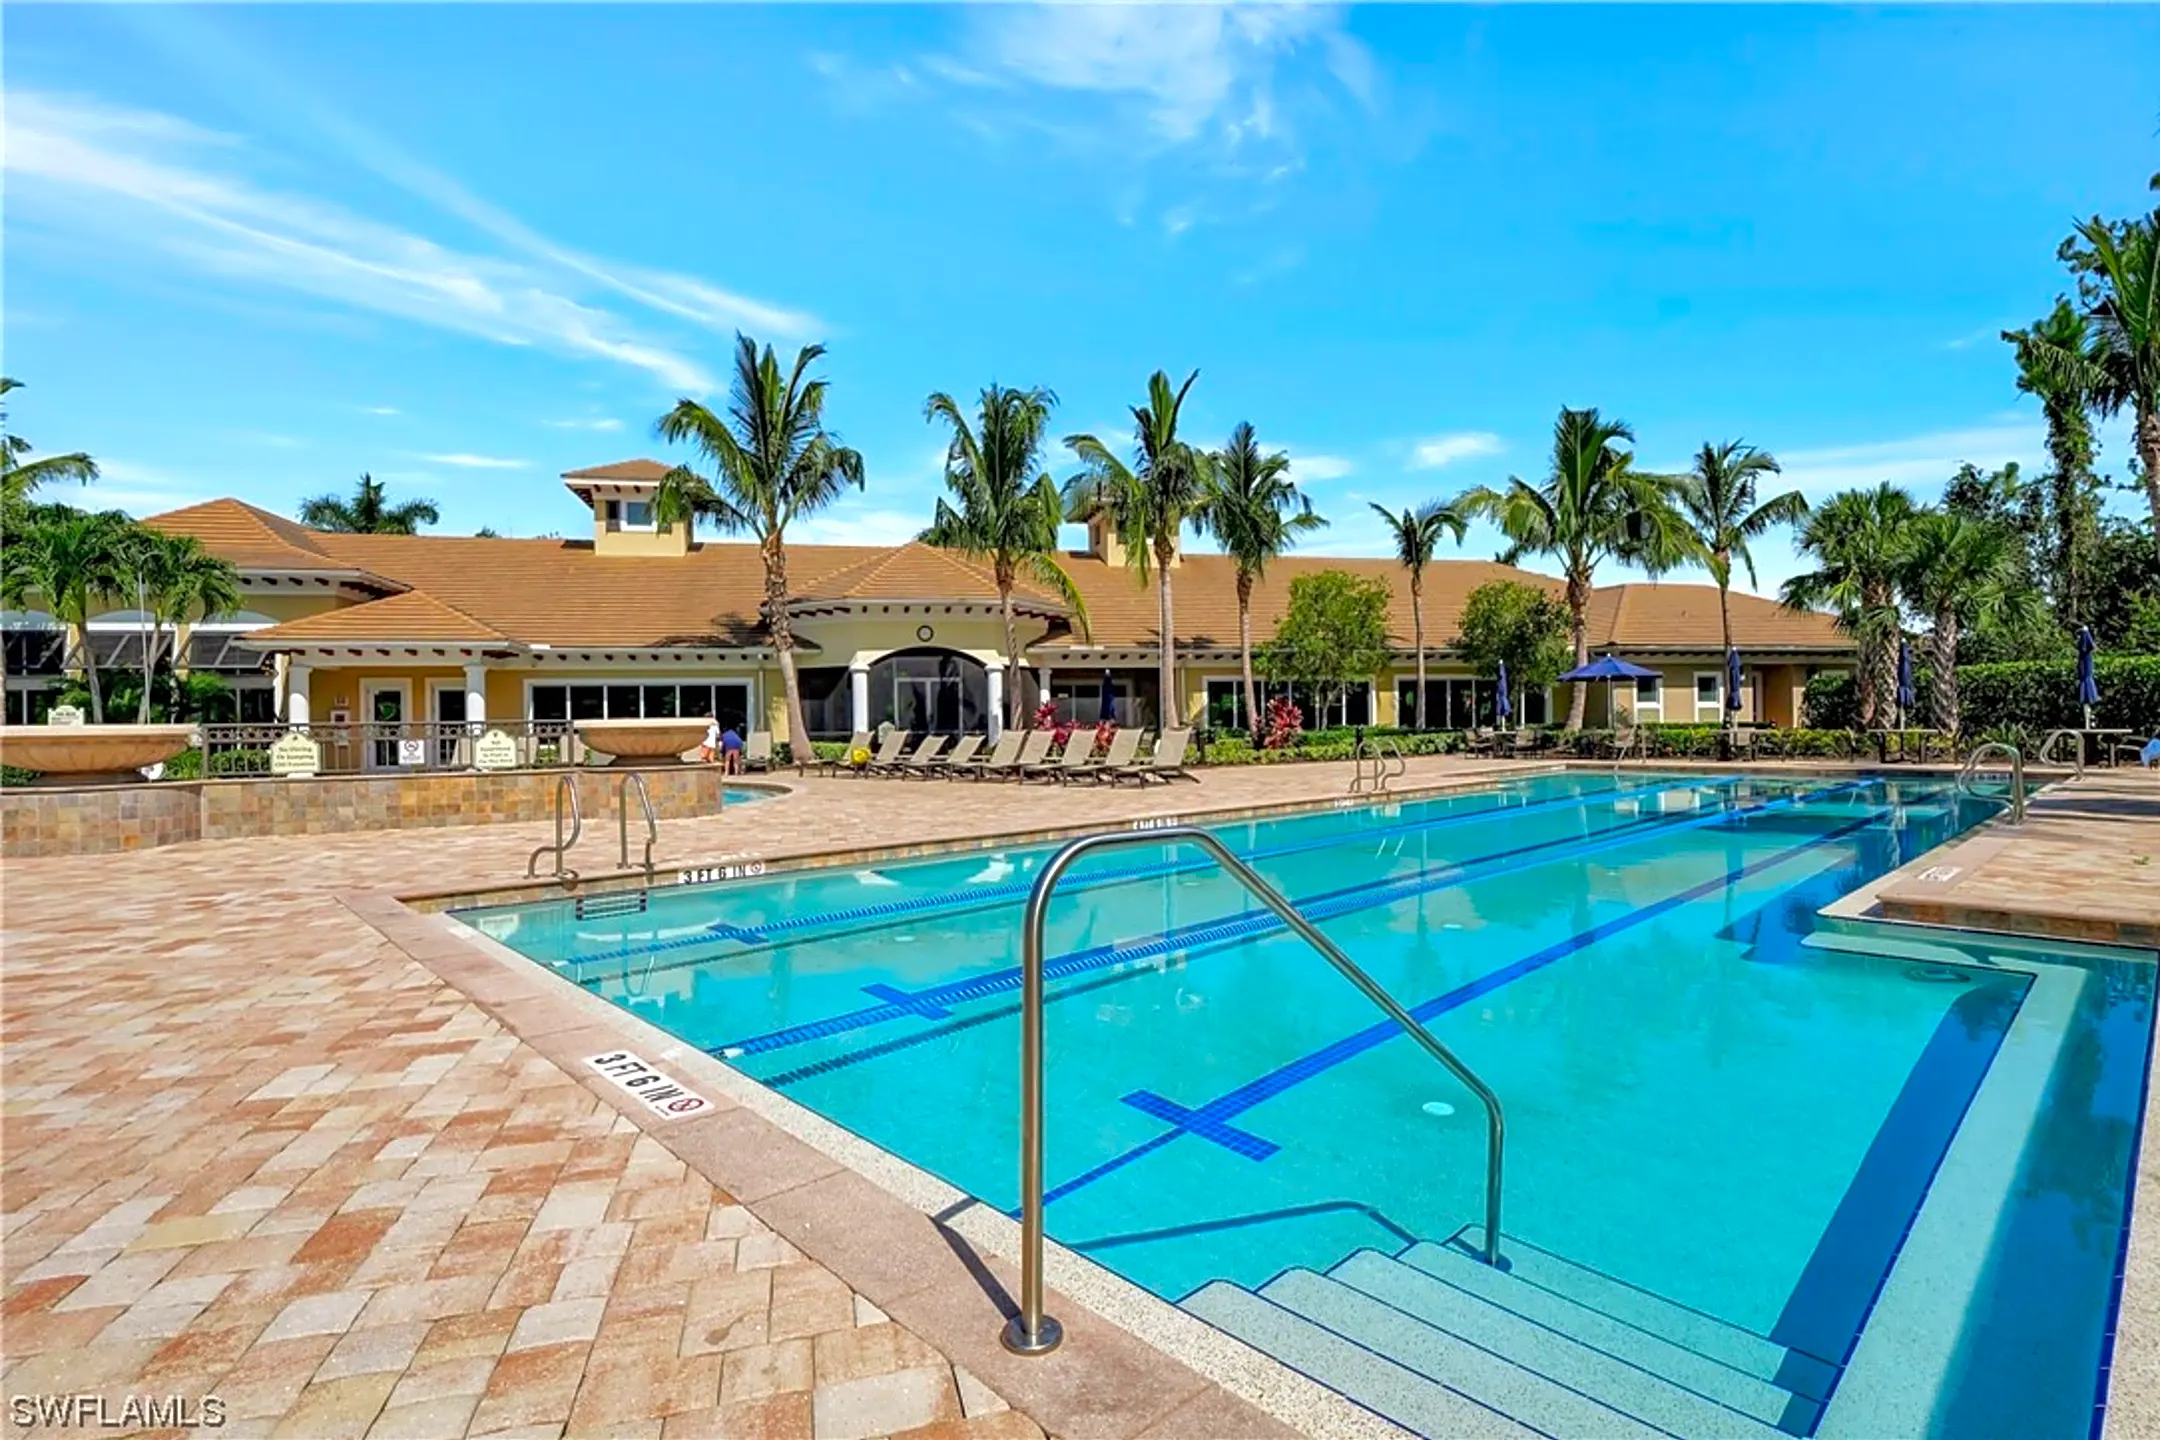 Pool - 11289 Suffield St - Fort Myers, FL